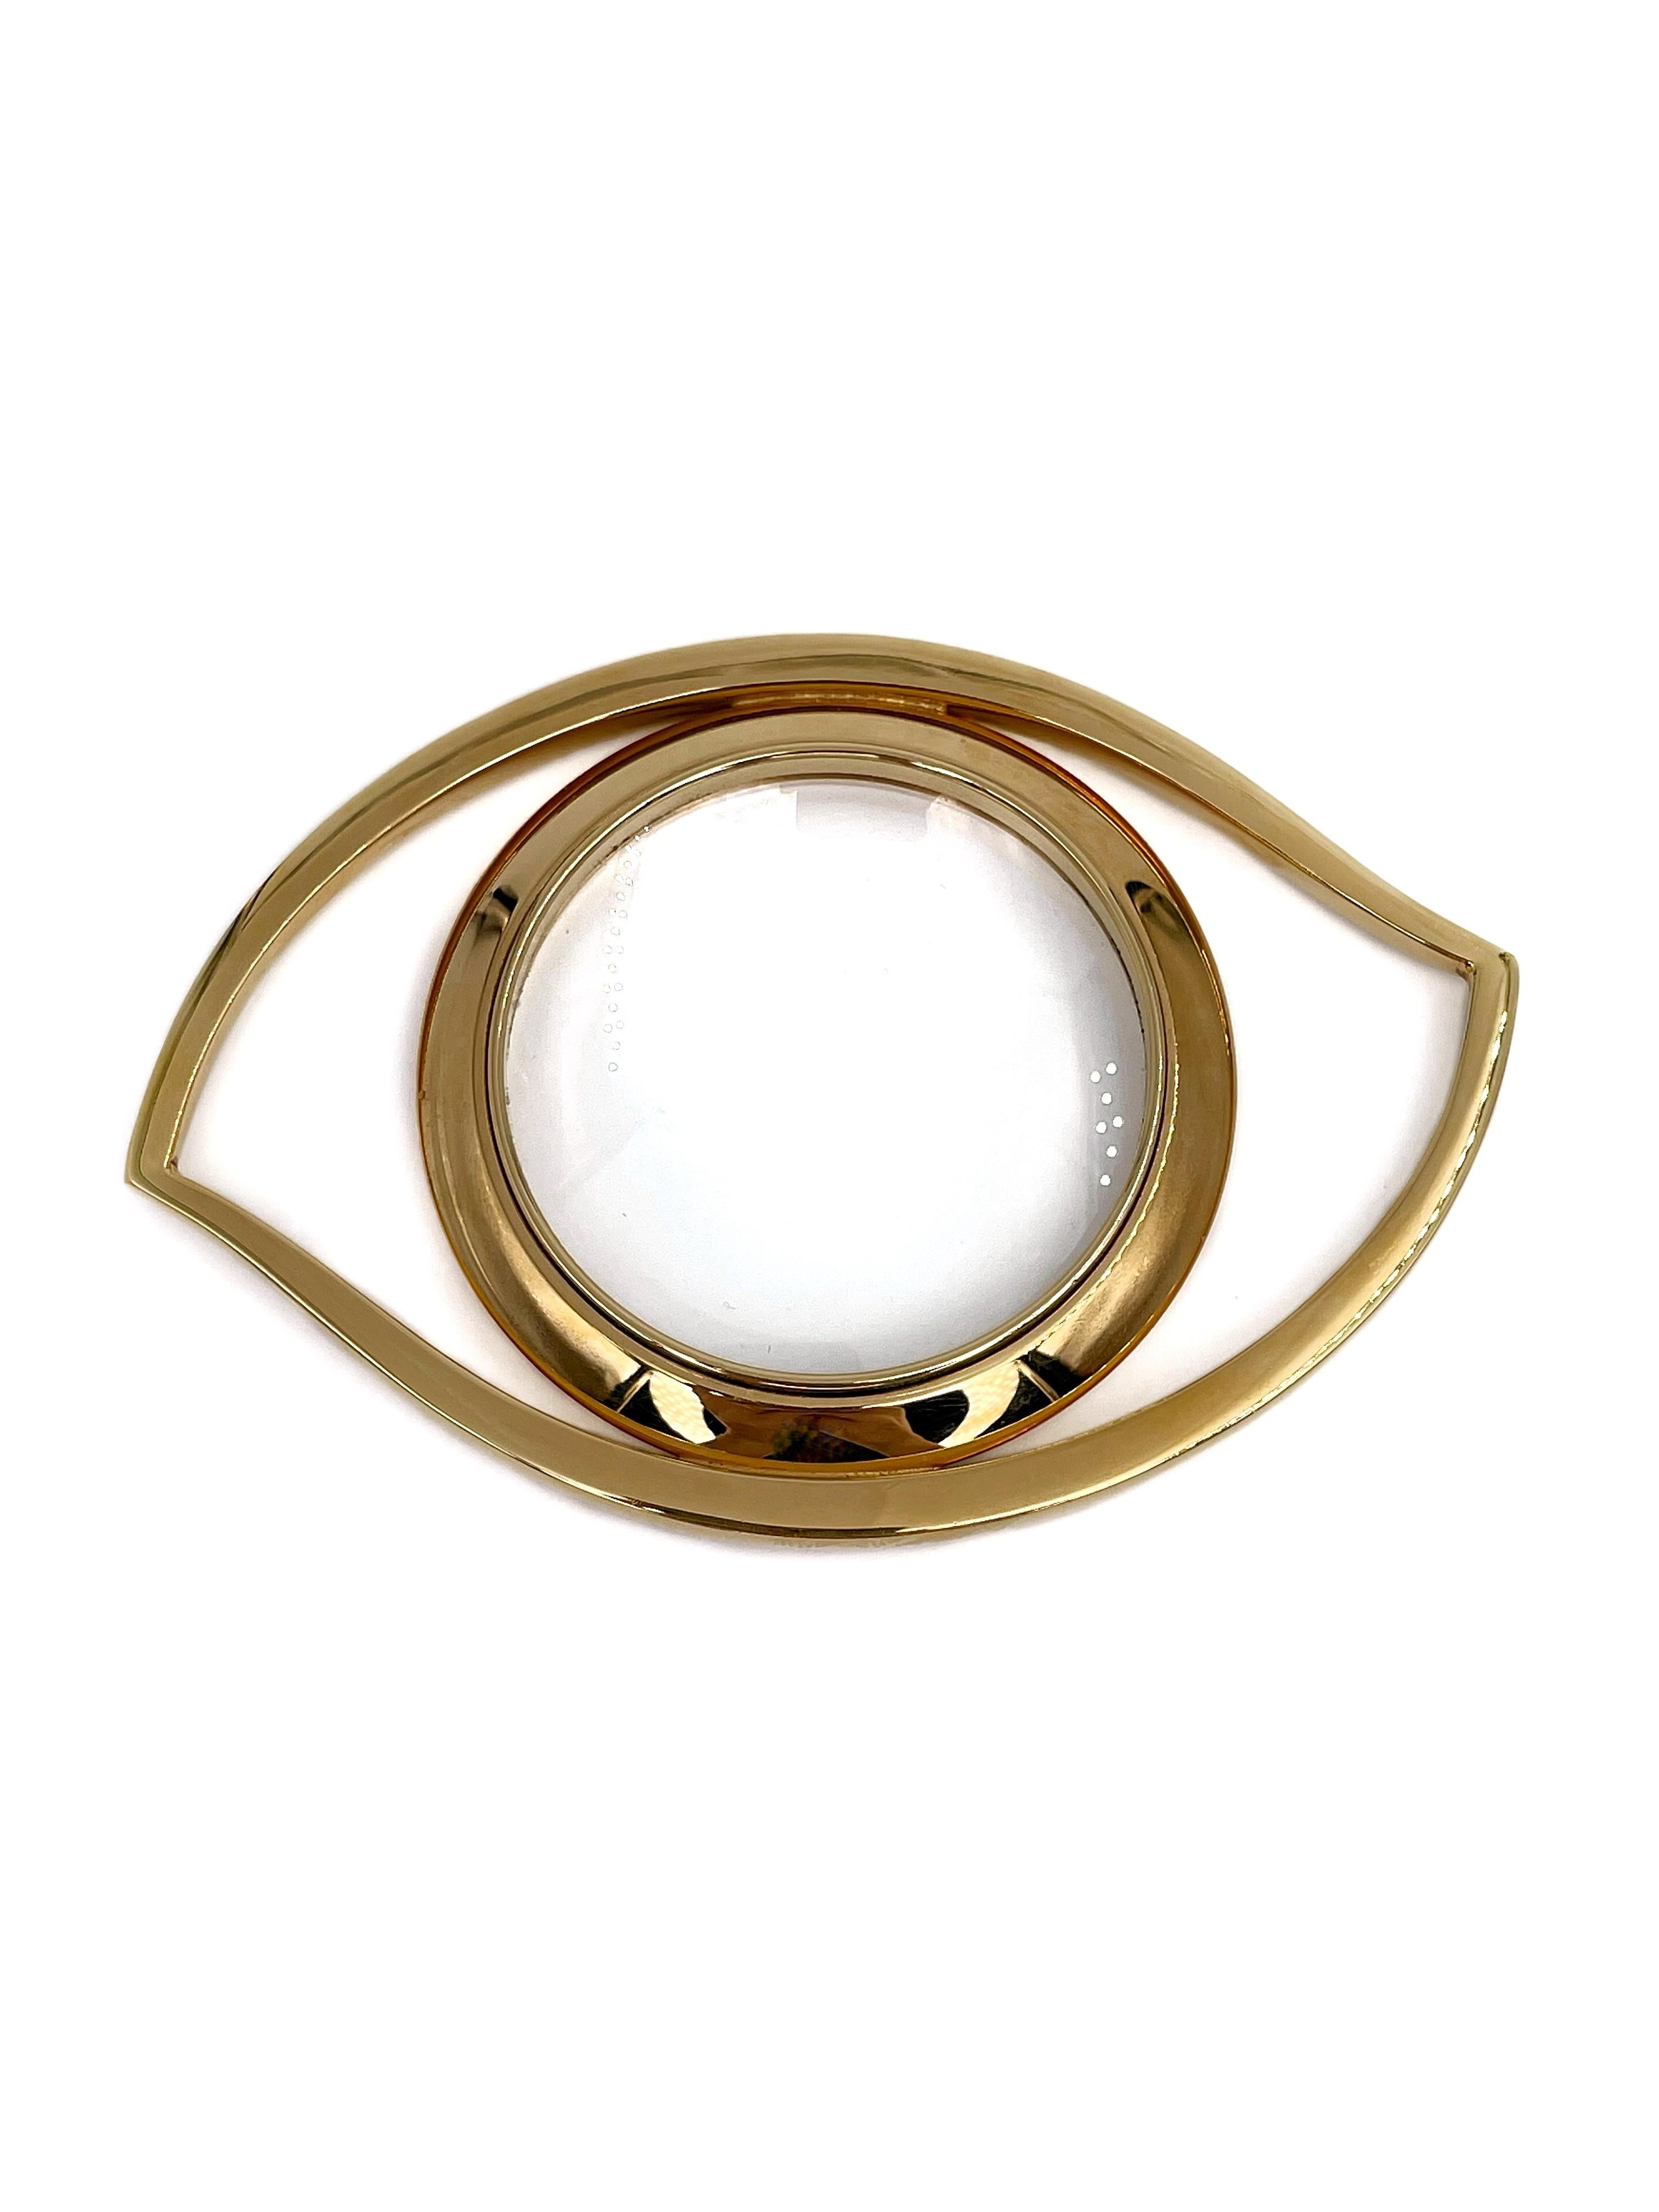 This is a desk magnifying glass designed by Jean Cocteau for Hermes in 1960’s. It represents the Eye of Cleopatra in gilded metal. It can be used as an interior detail or also worn as a massive pendant or scarf ring. 

Signed: “Hermès. Paris” (shown